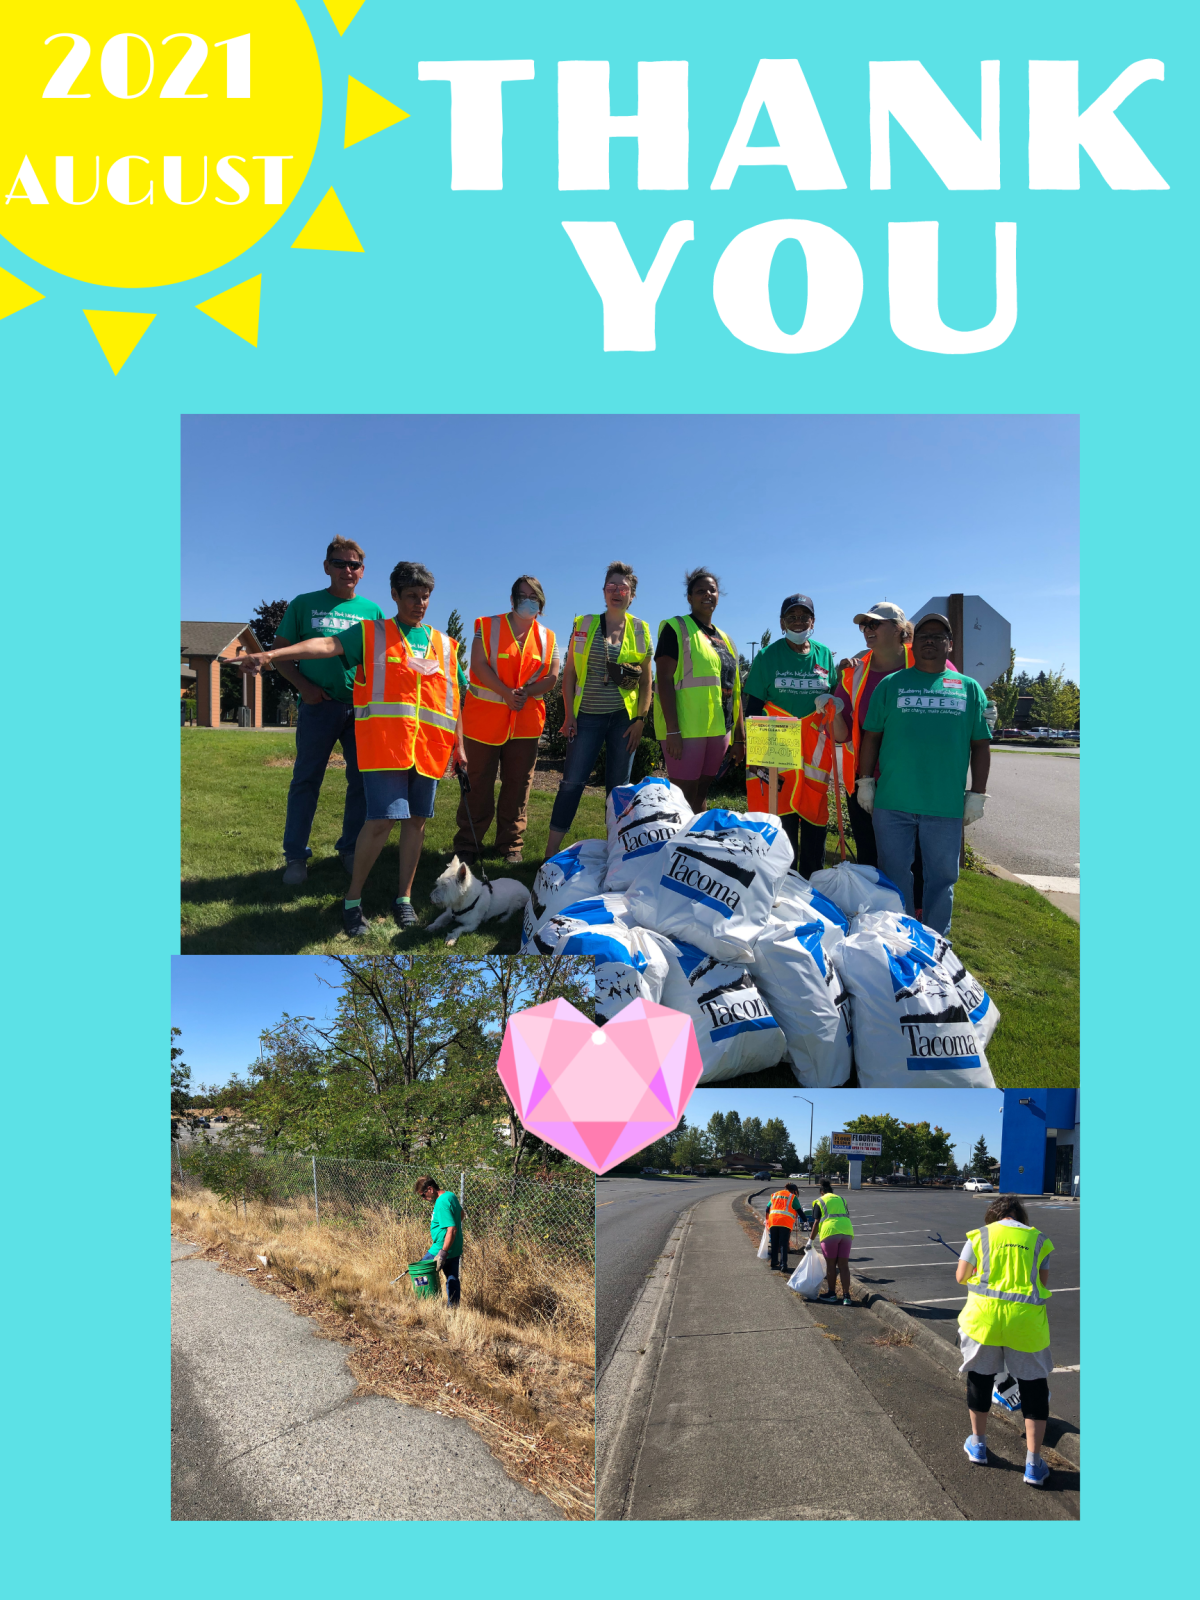 SENCo AUGUST CLEAN-UP THANK YOU!!!